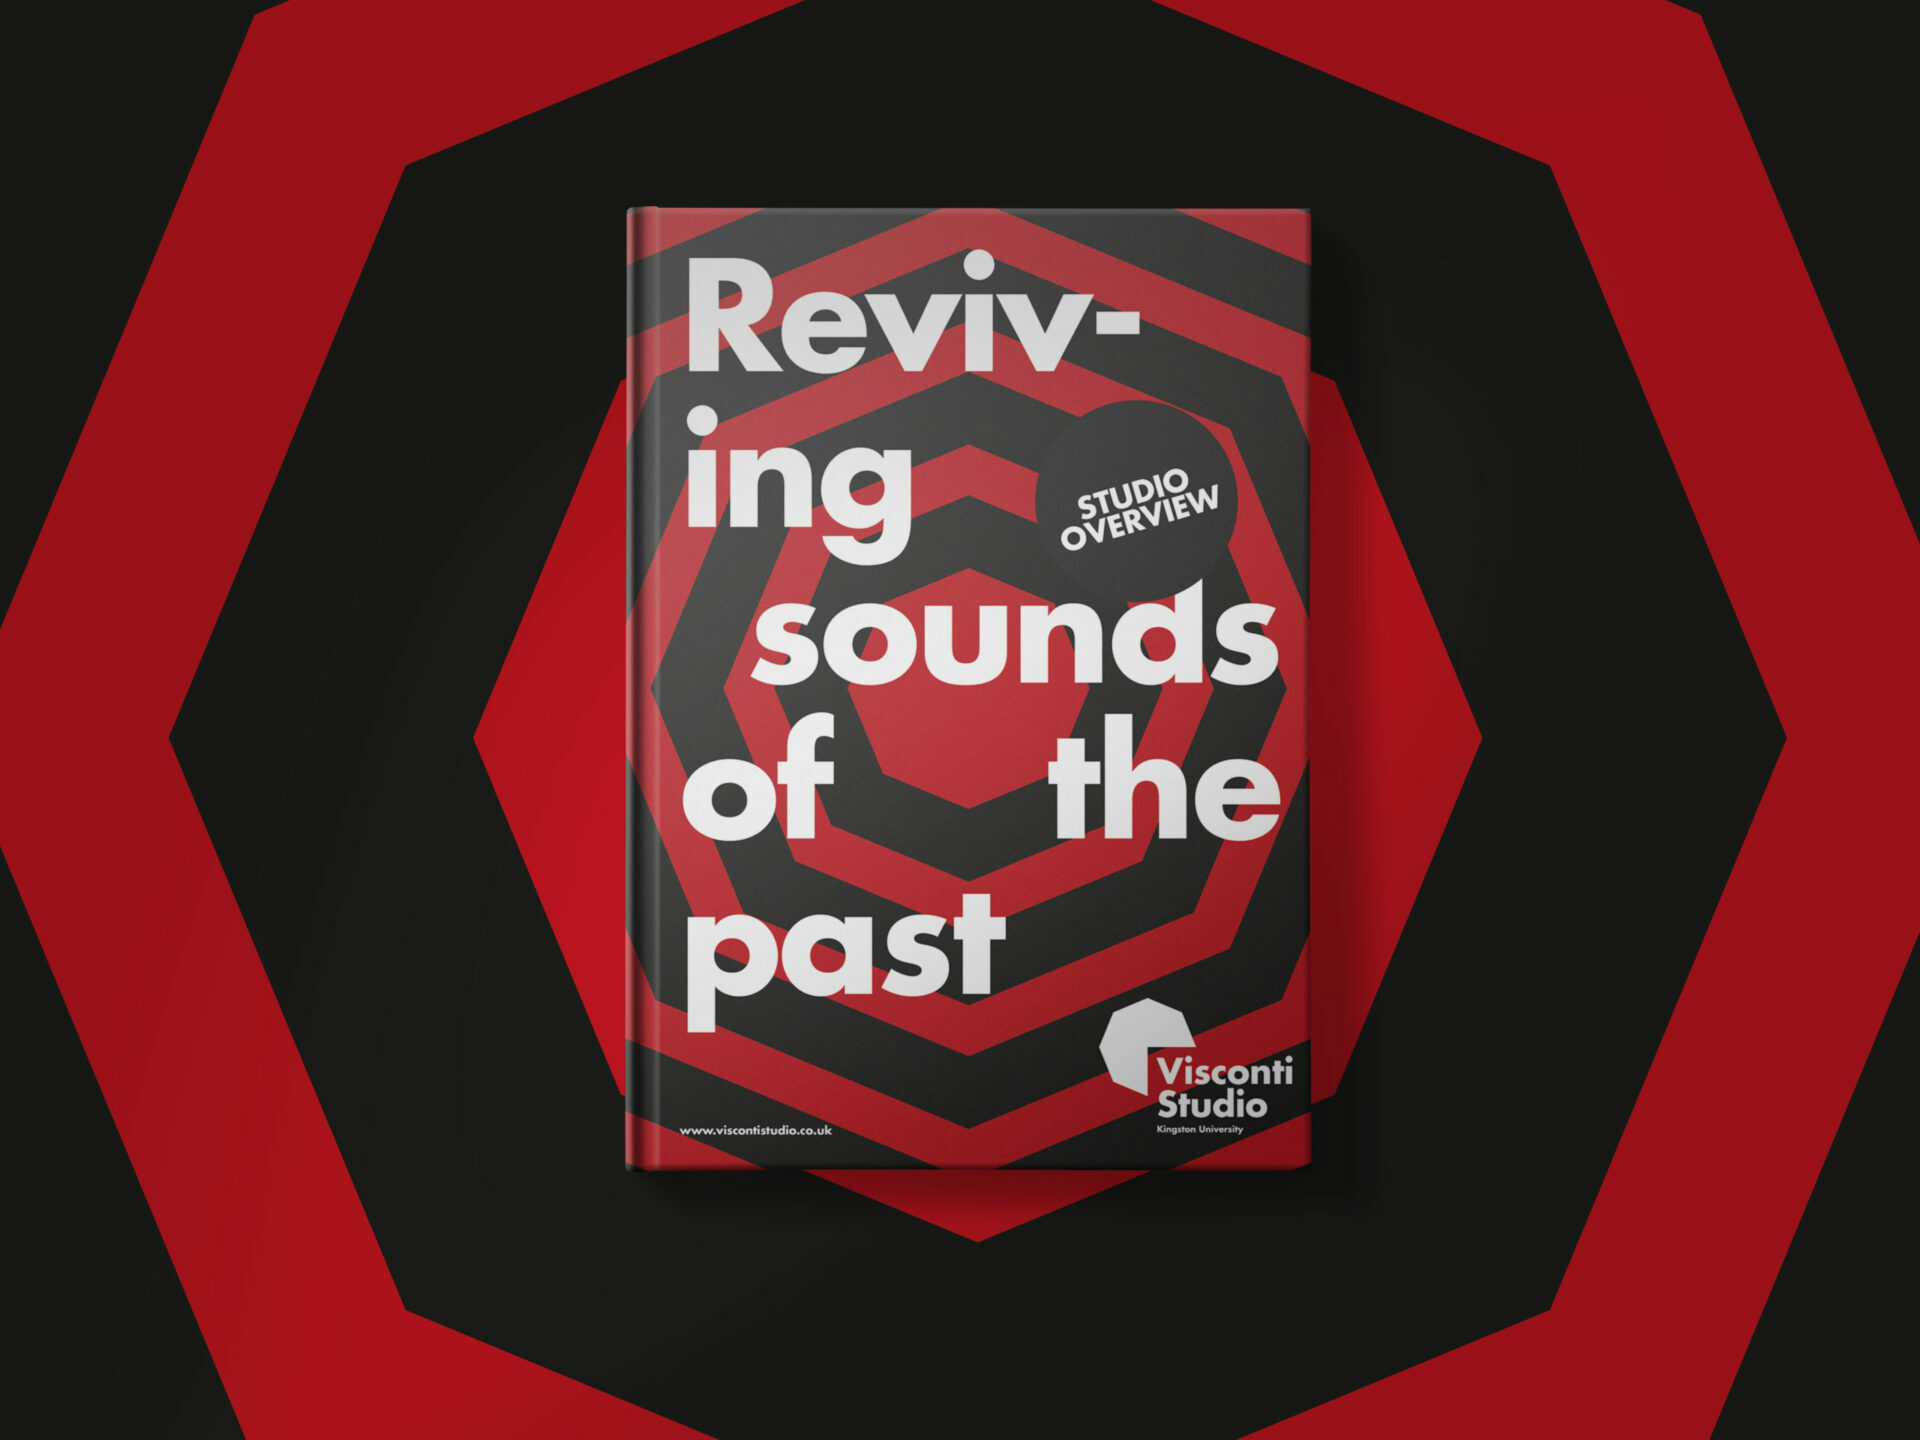 An image of a branded brochure using the red and black octagonal image.